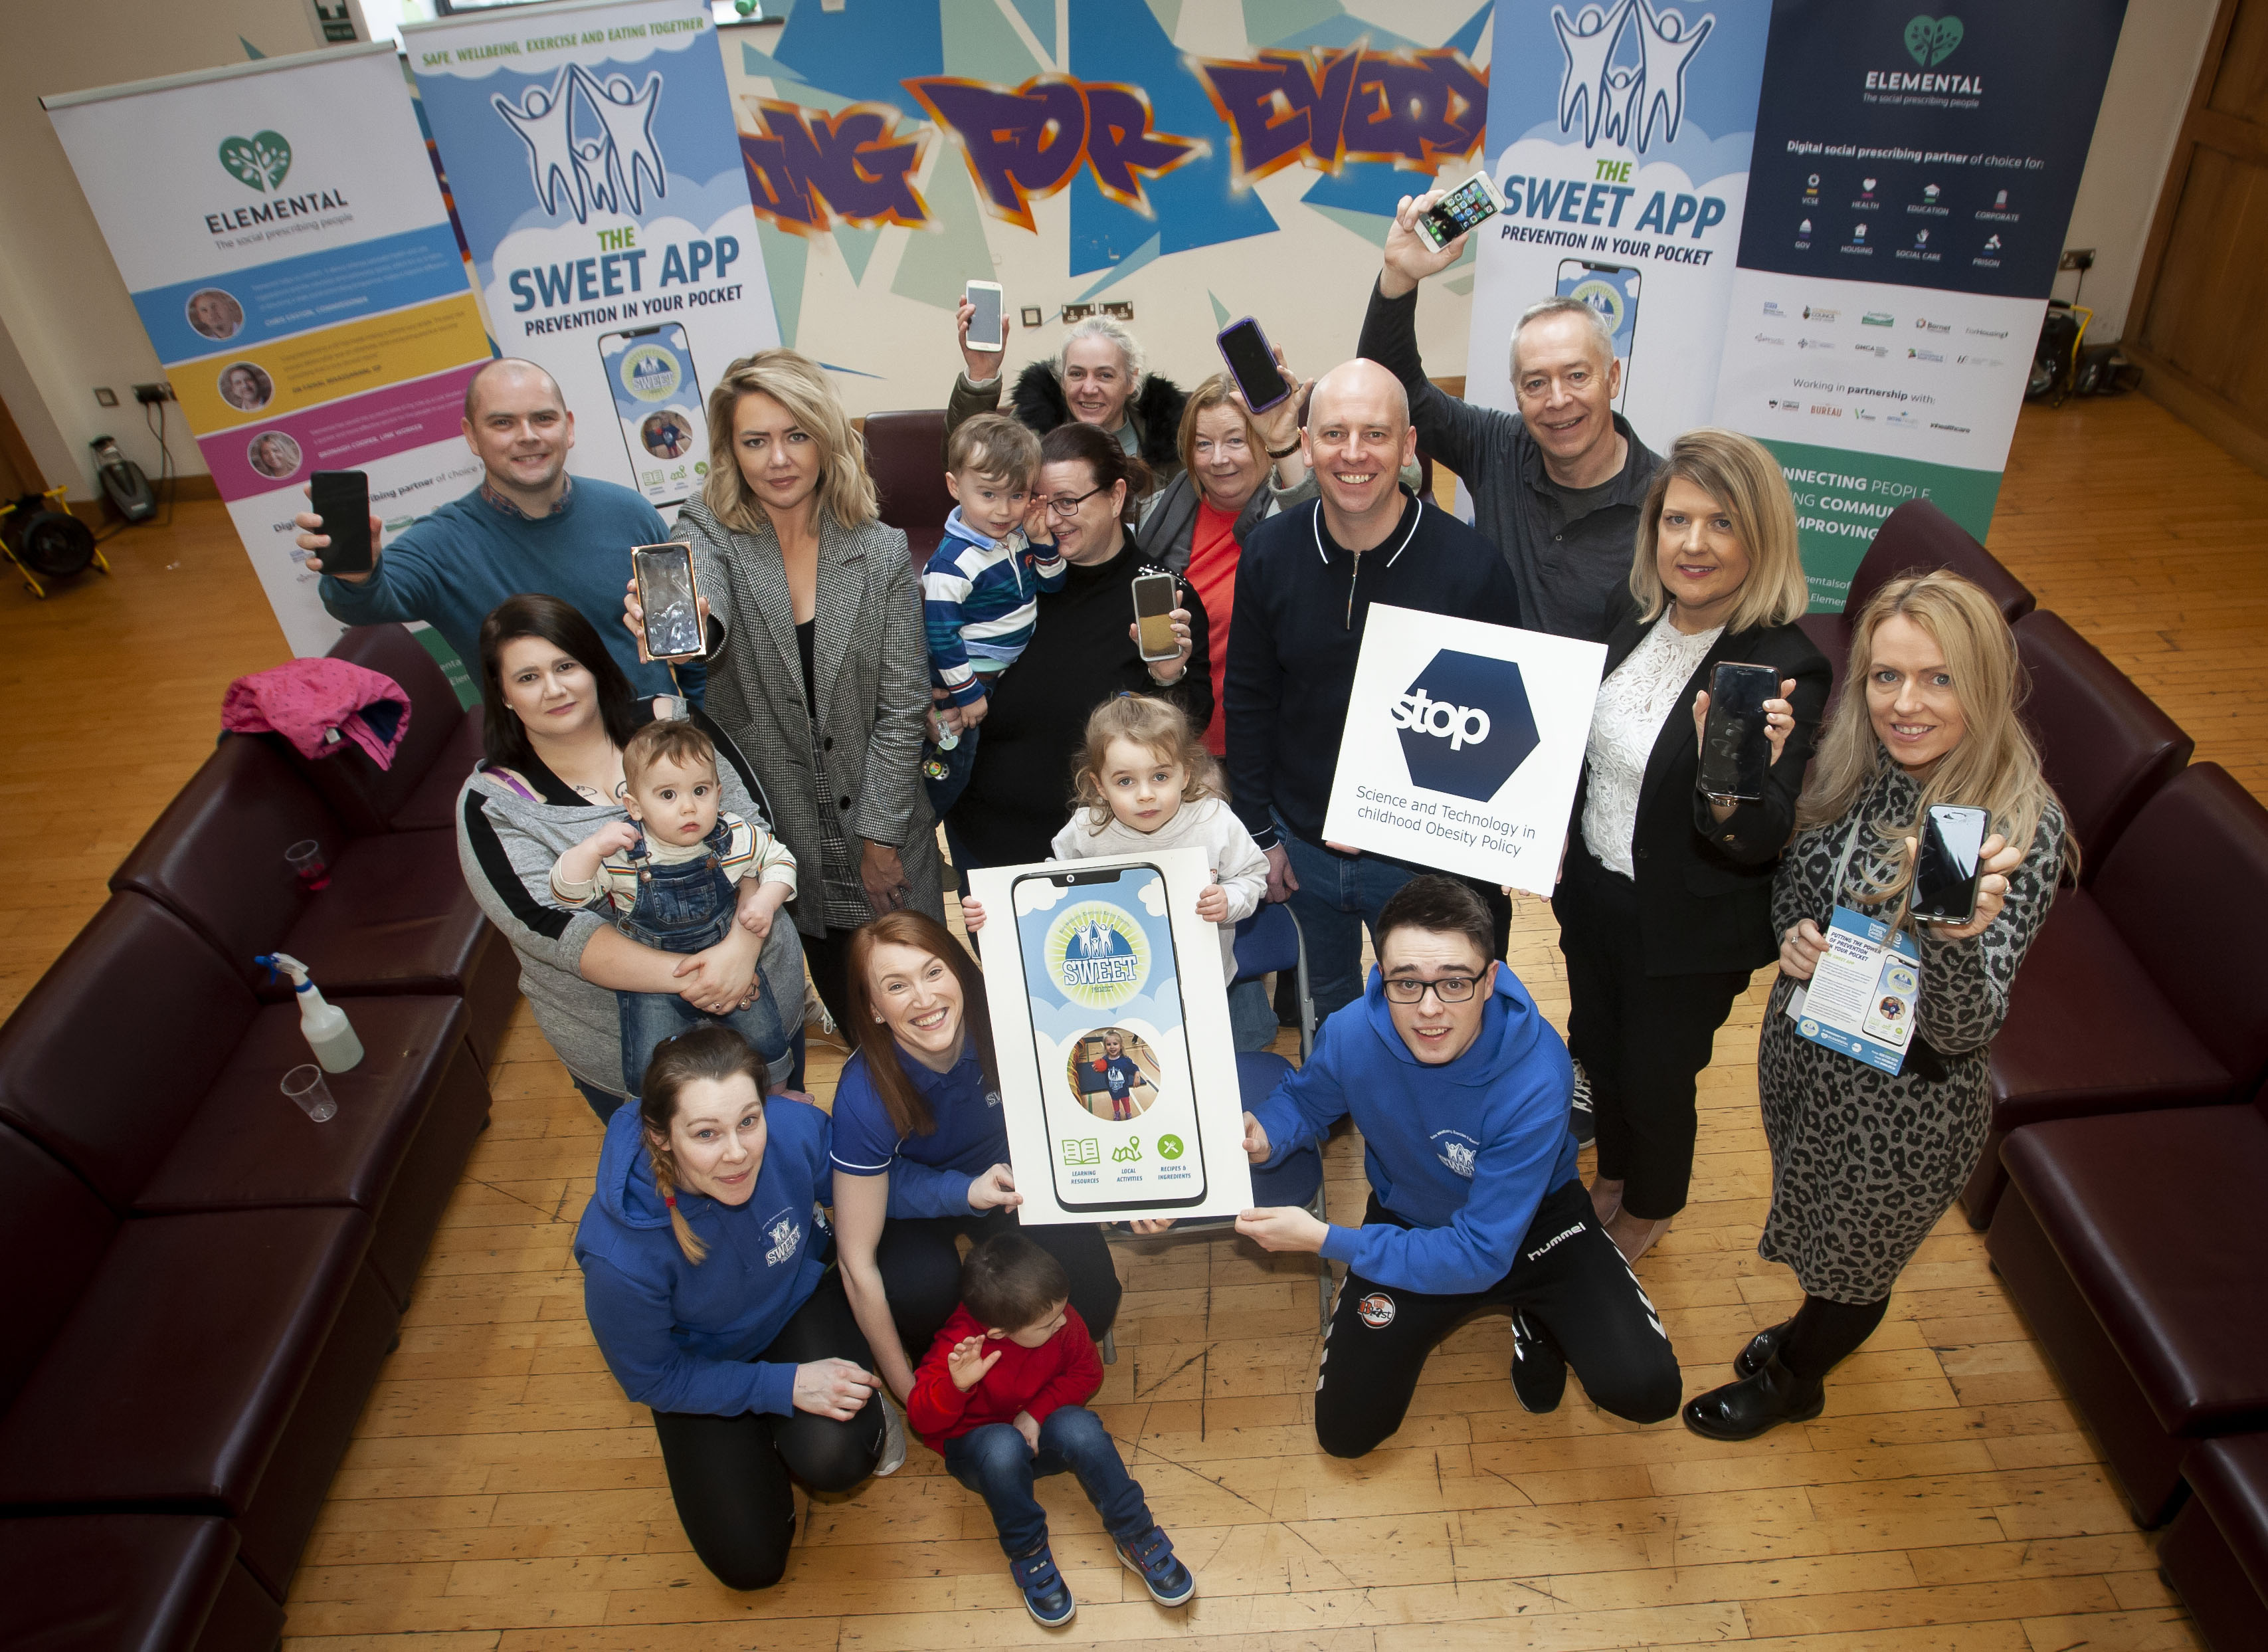 SWEET APP!. . . Group Pictured At The Old Library Trust On Friday Last For The Launch Of The Innovative New Project Aimed At Tackling Childhood Obesity. The SWEET App Is A Mobile Phone Spin Off Offering Real Time Support In Your Pocket, When And Where You Need It. Included In Photo Are Parents/grandparents And Children Who Will Avail Of The App, Along With George McGowan, Project Director, OLT, Phil Vickery And Serena Terry, COO, Elemental, Caomhan Logue, Ulster University, Julie White, SWEET Programme Manager And Roisin McDaid, OLT, And Deirdre McDaid, Manager, Surestart. (Photos: Jim McCafferty Photography)